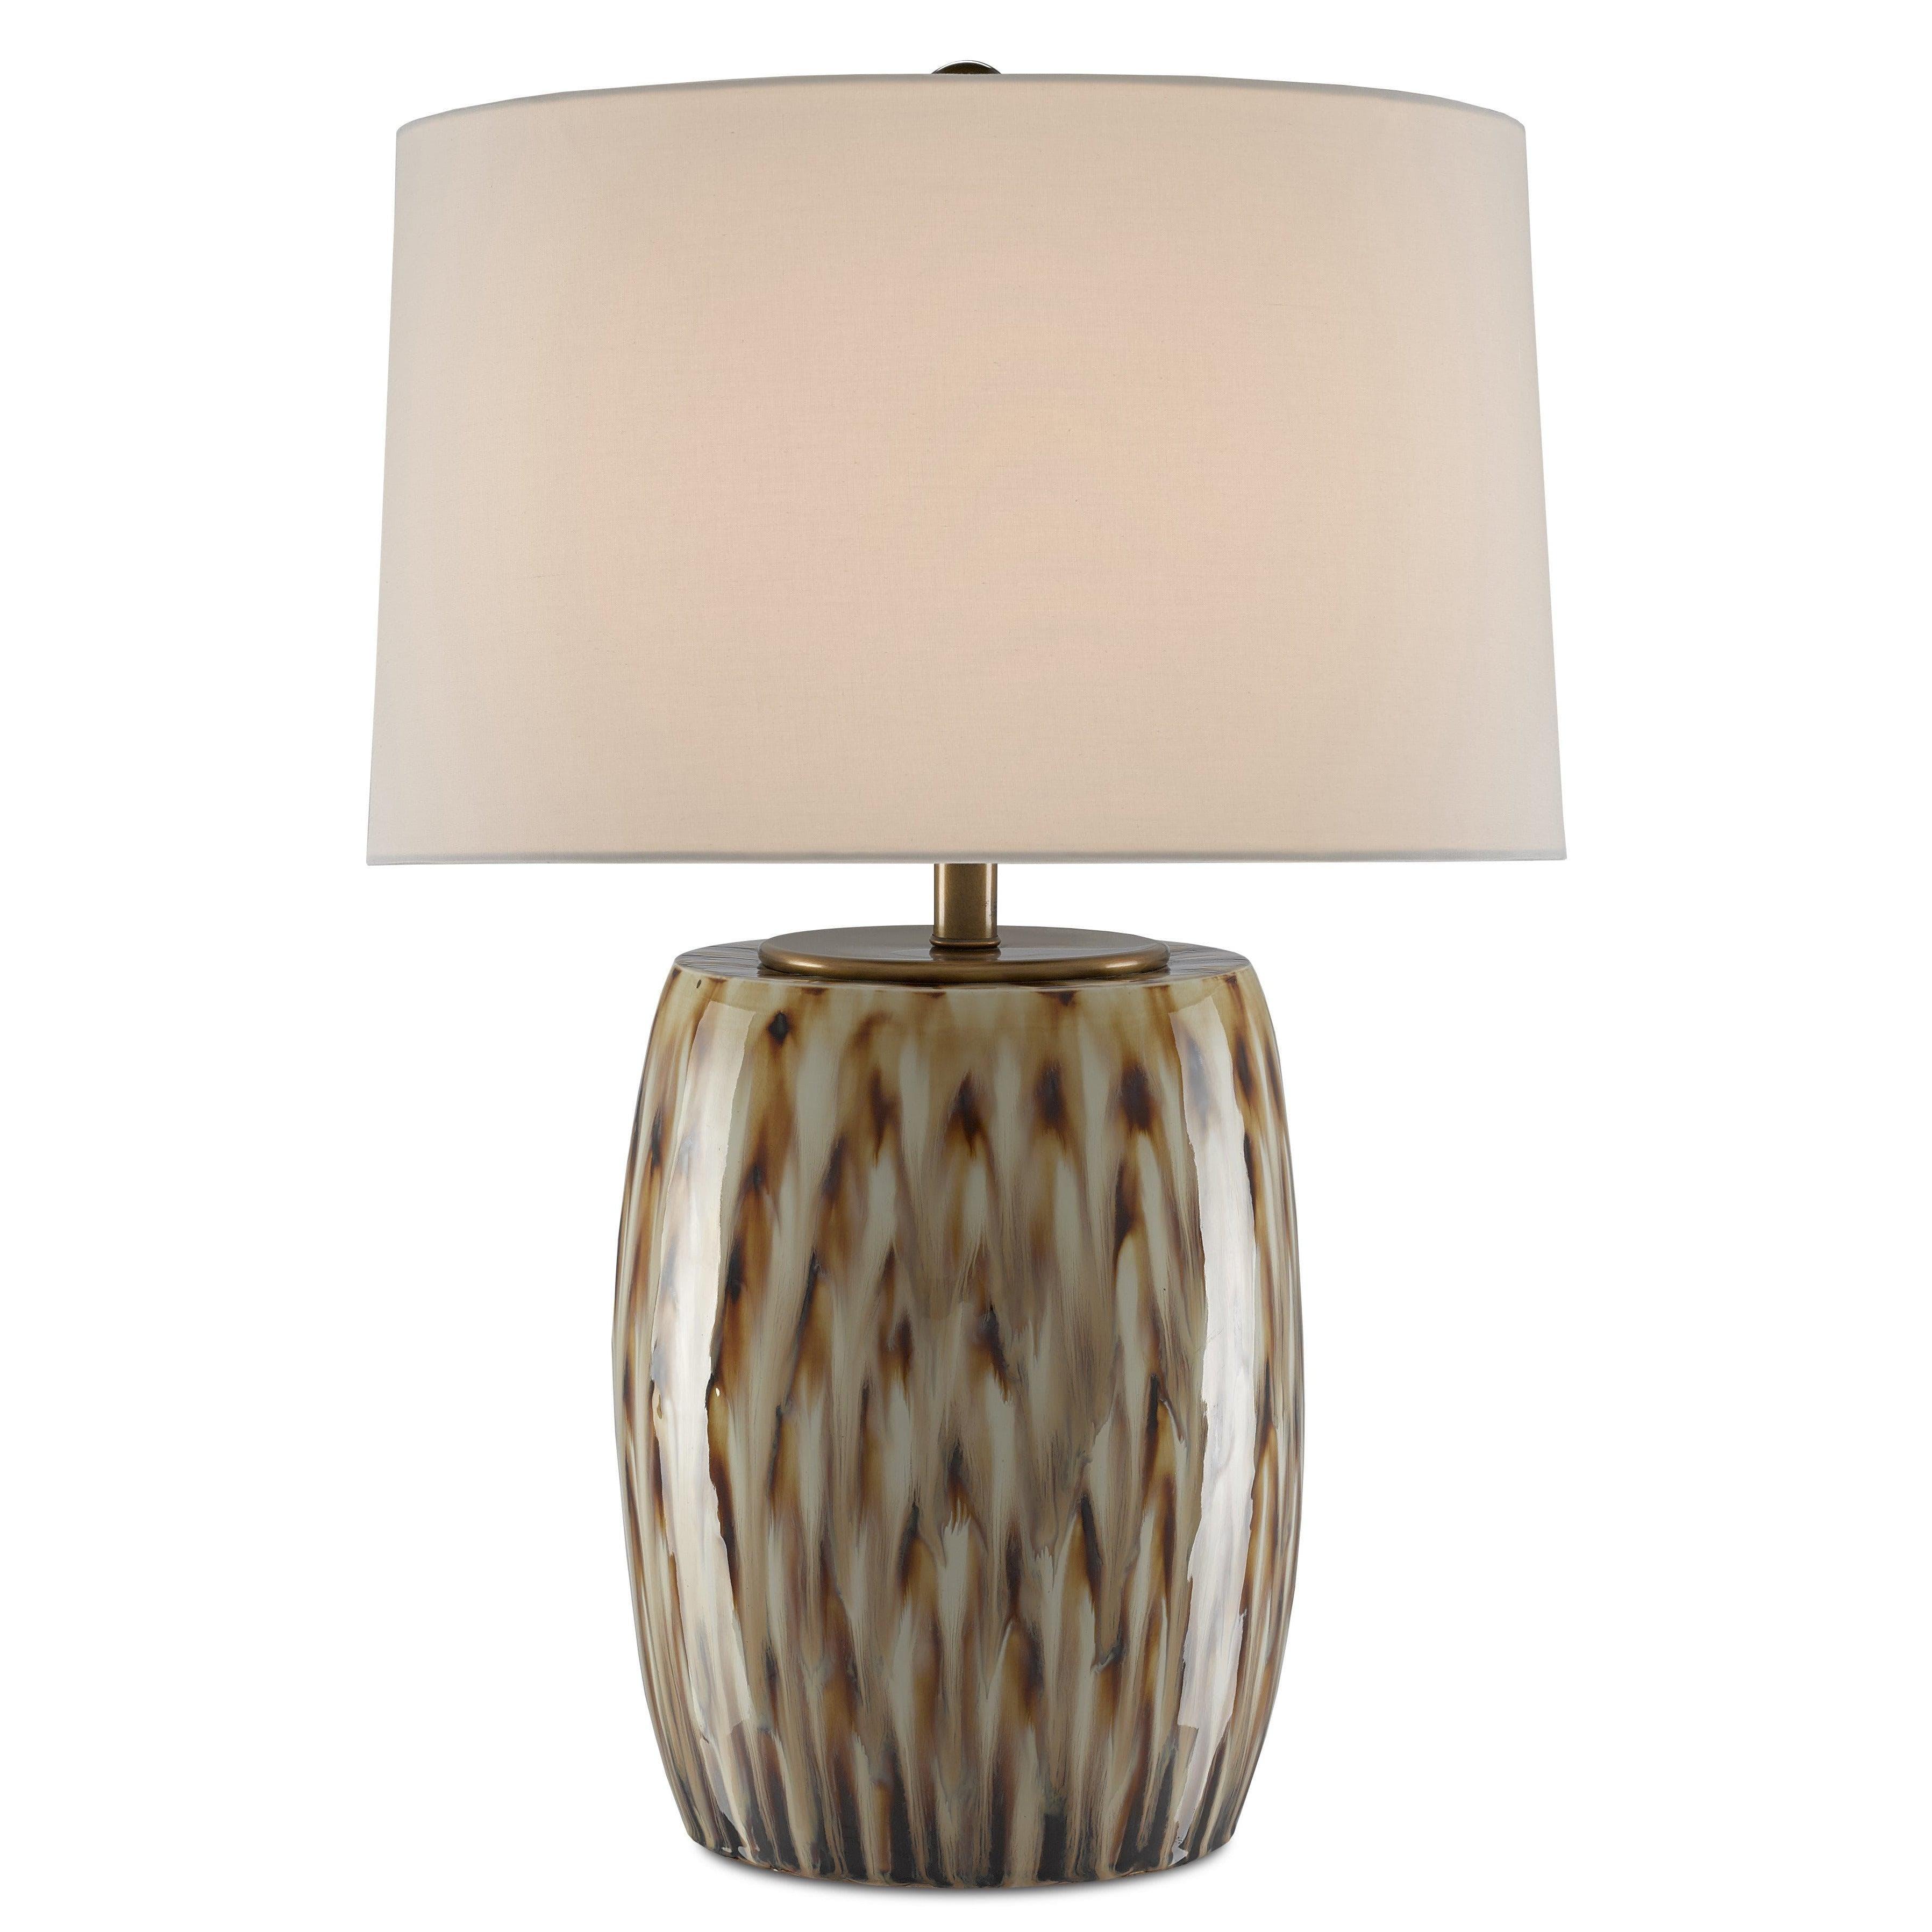 Currey and Company - Milner Table Lamp - 6000-0457 | Montreal Lighting & Hardware